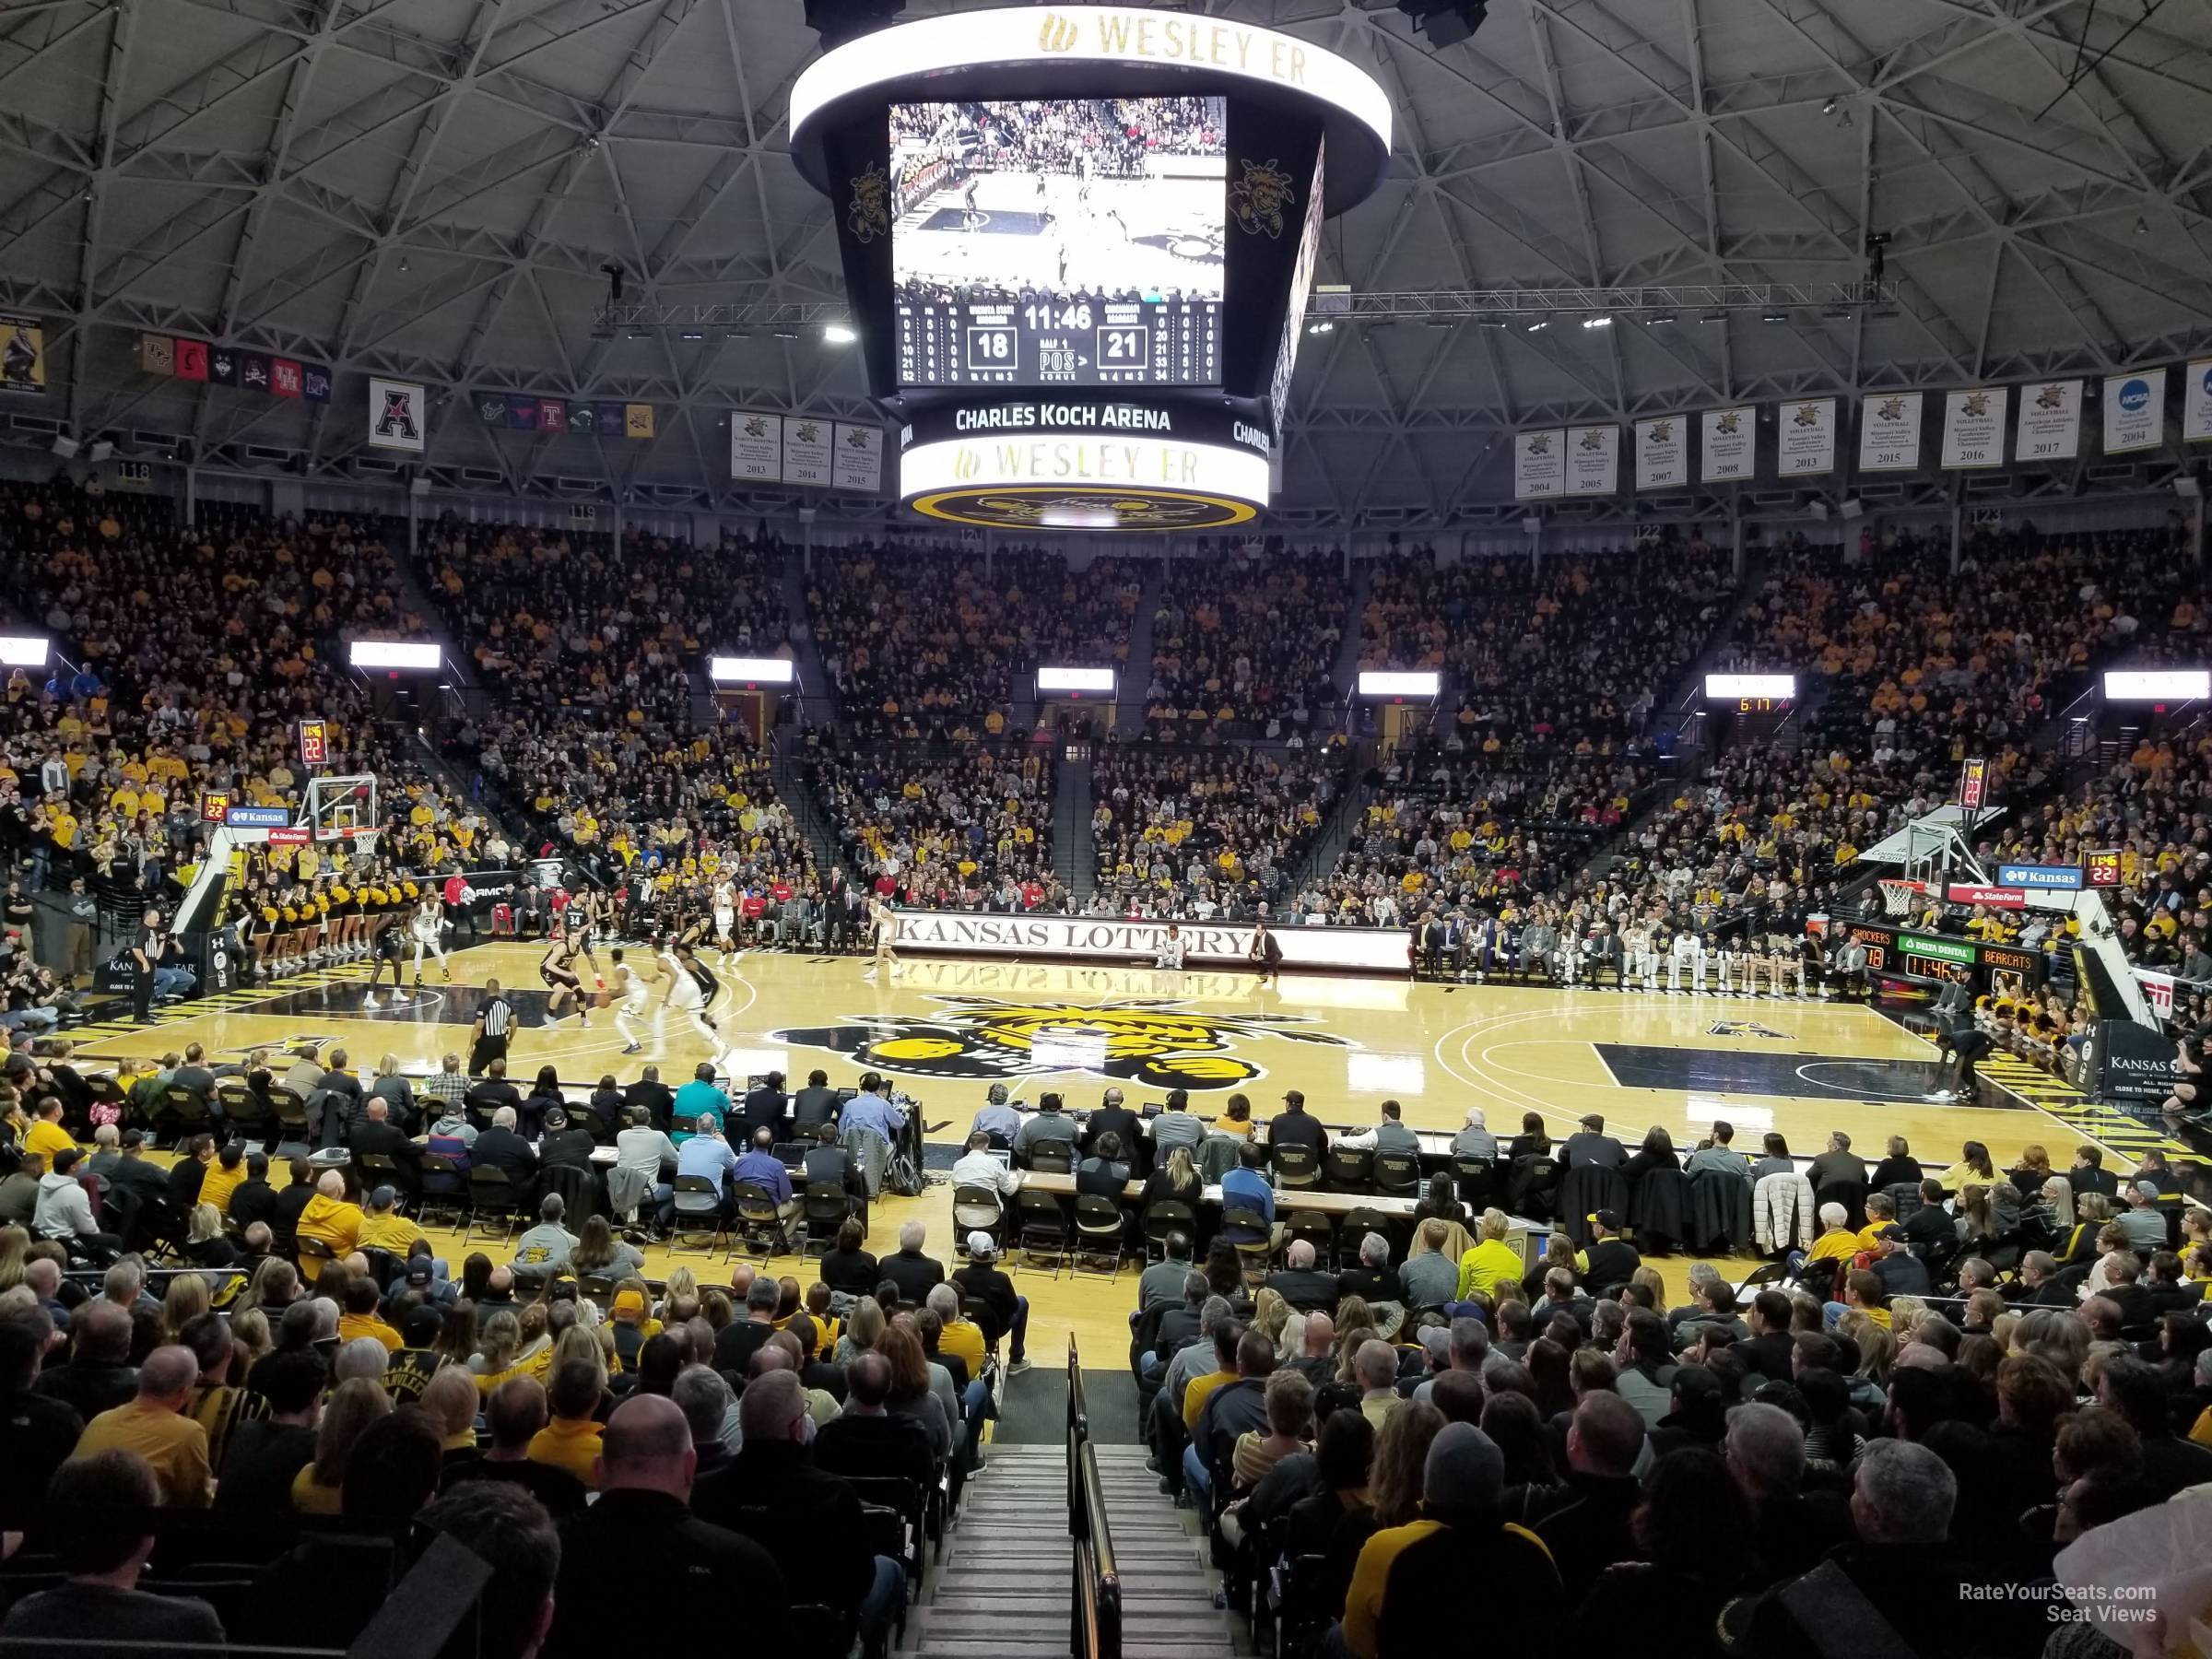 Section 106 at Charles Koch Arena